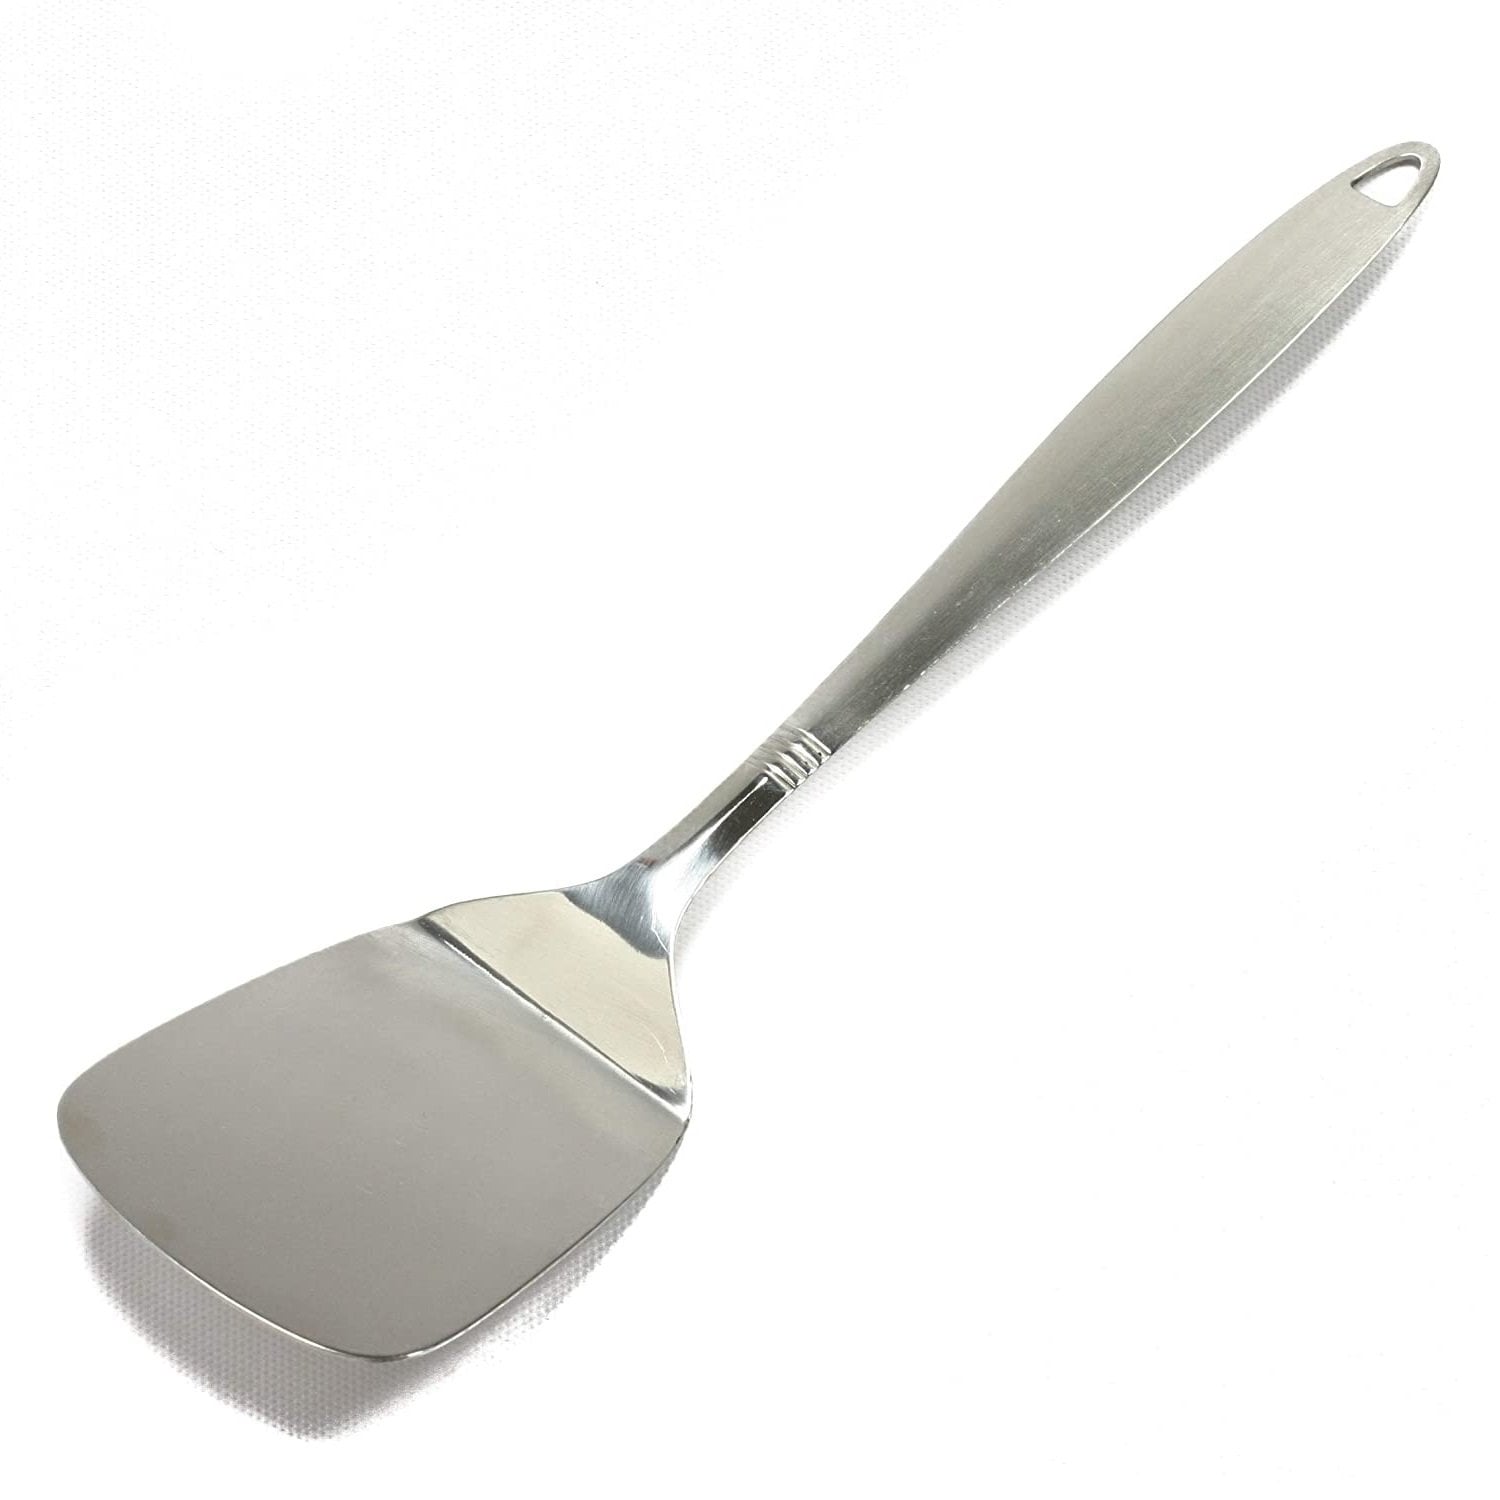 2 PC Chef Craft Small Slotted Cookie Spatula Stainless Steel Wood Handle Kitchen